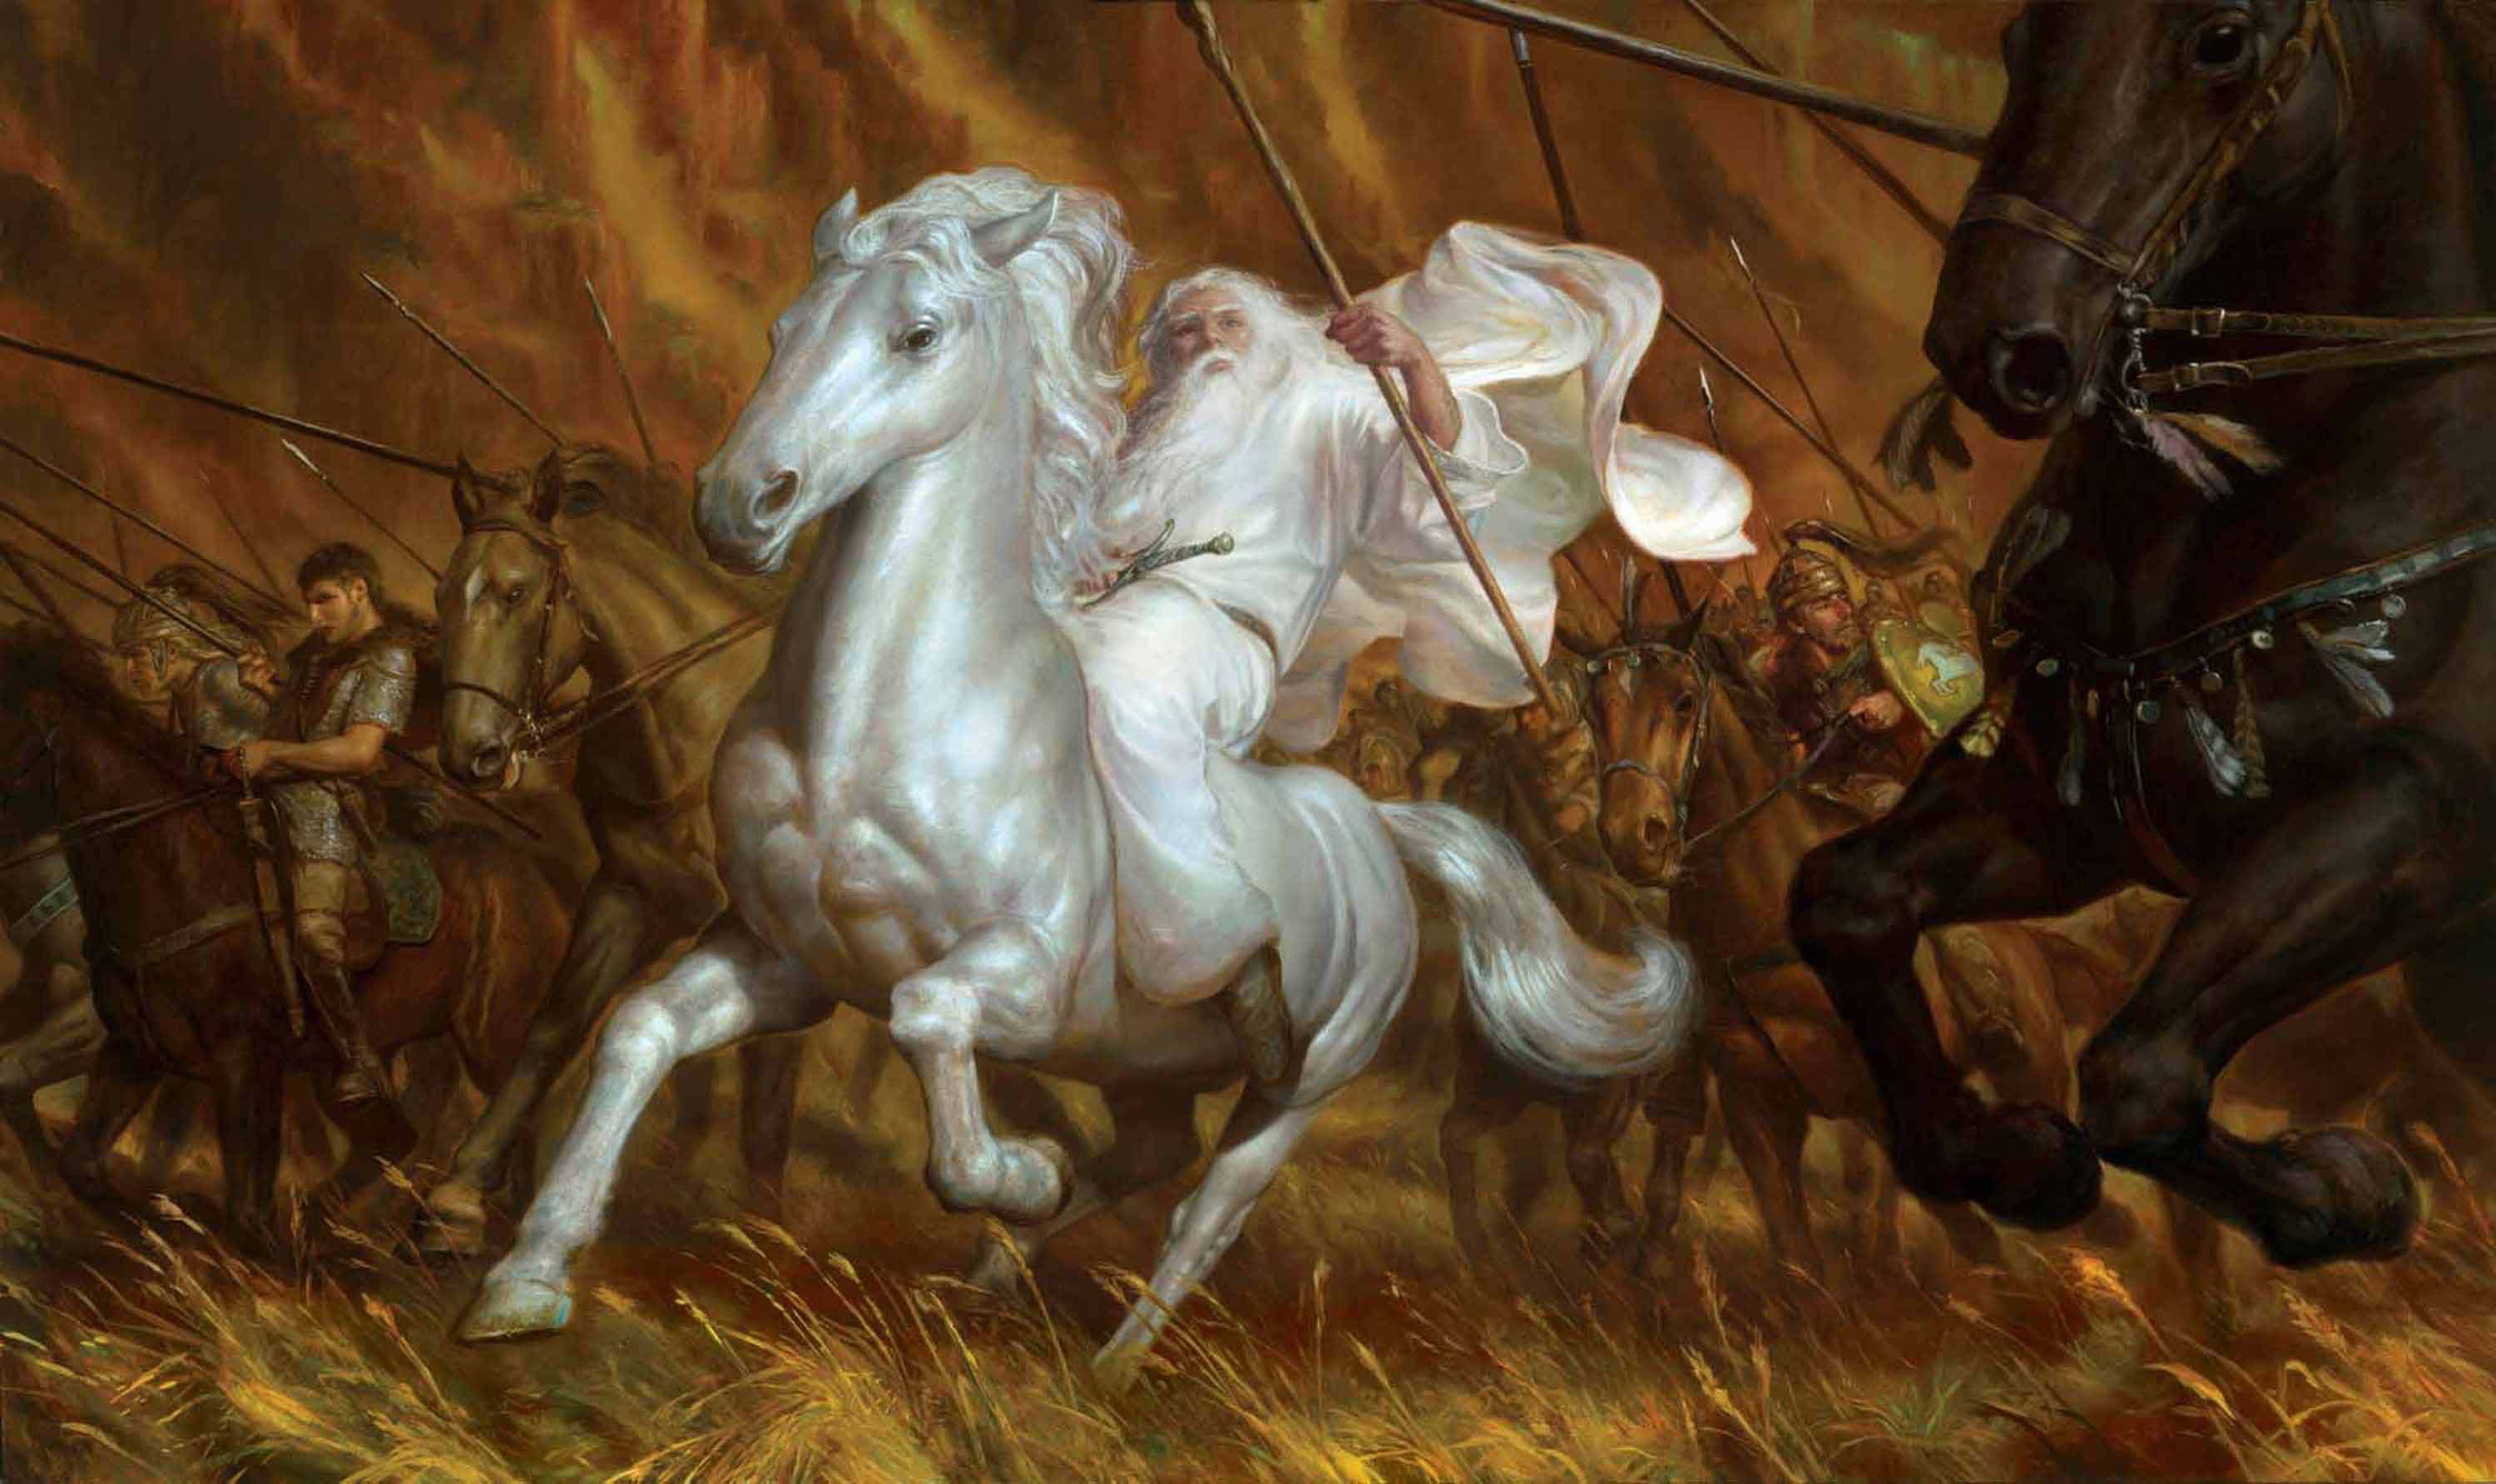 The White Rider
38" x 60"  Oil on Panel  2009
onward to Helm's Deep!
original art available for purchase